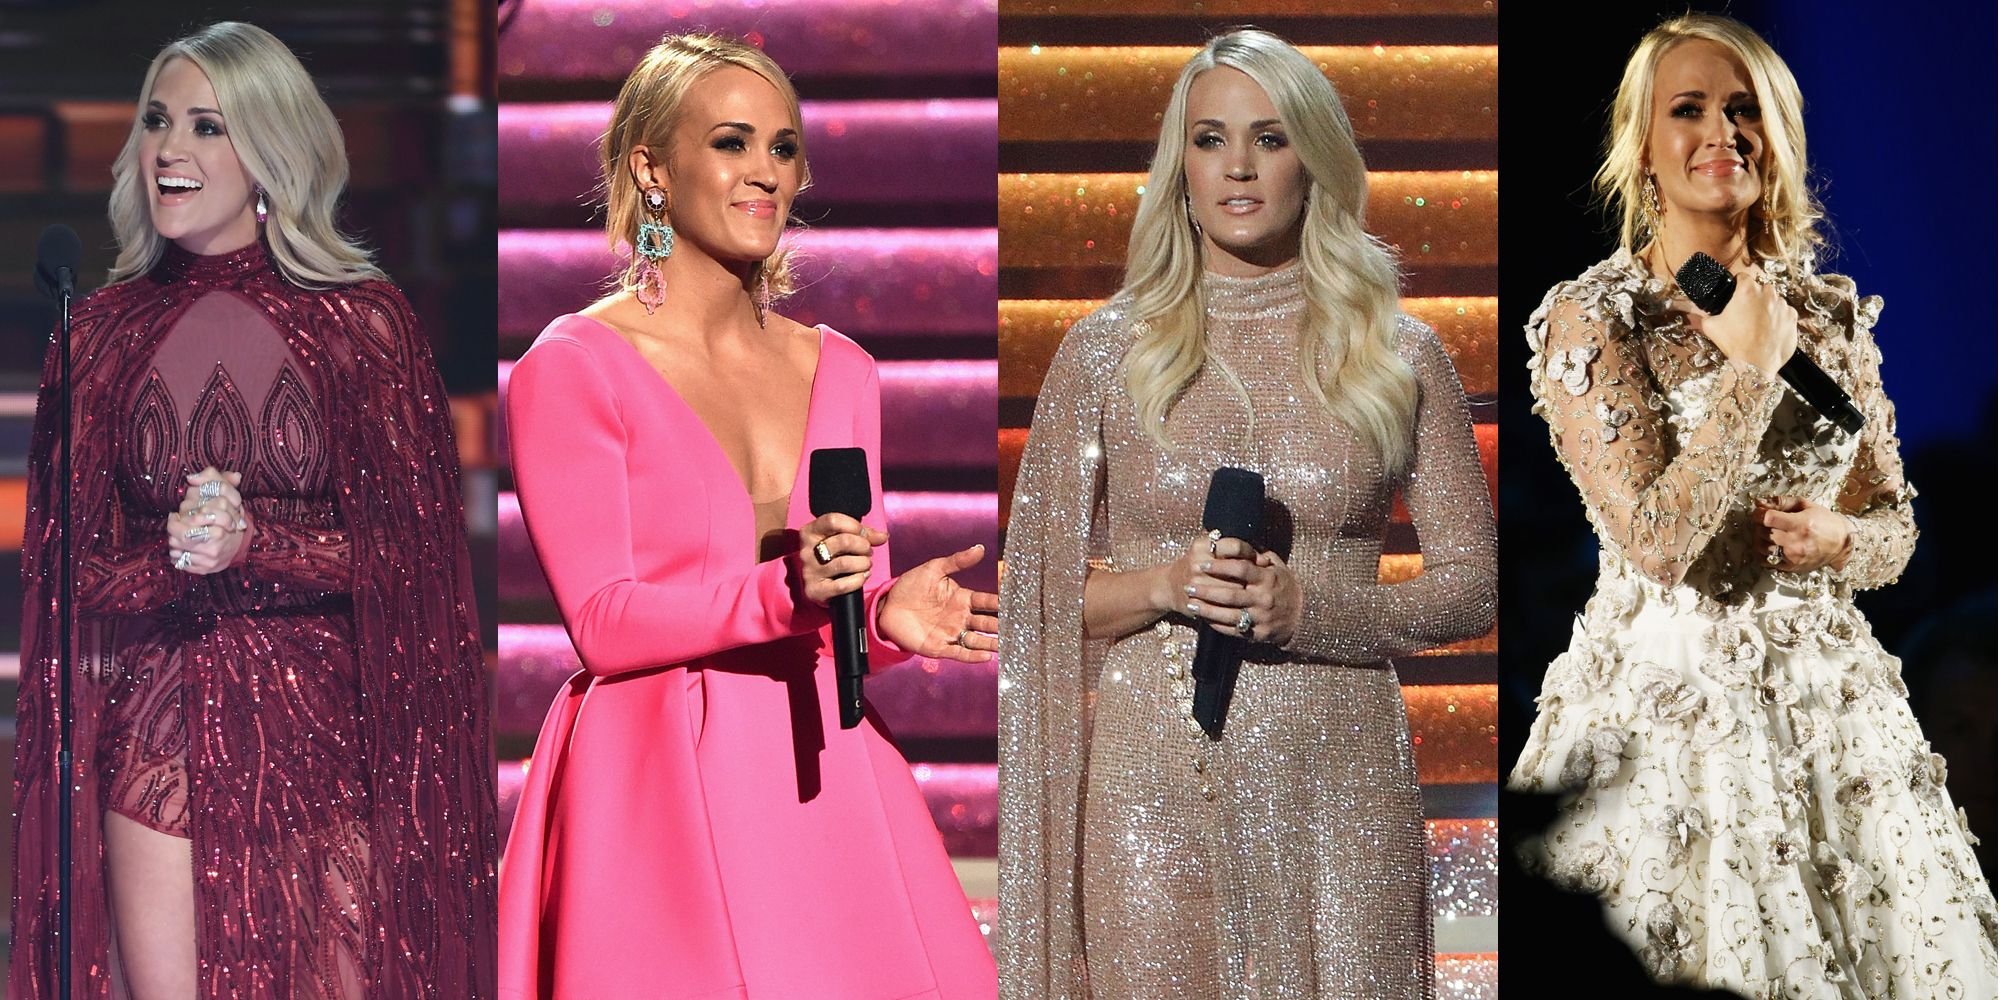 Carrie Underwood's 11 Outfits at the CMAs - Carrie Underwood